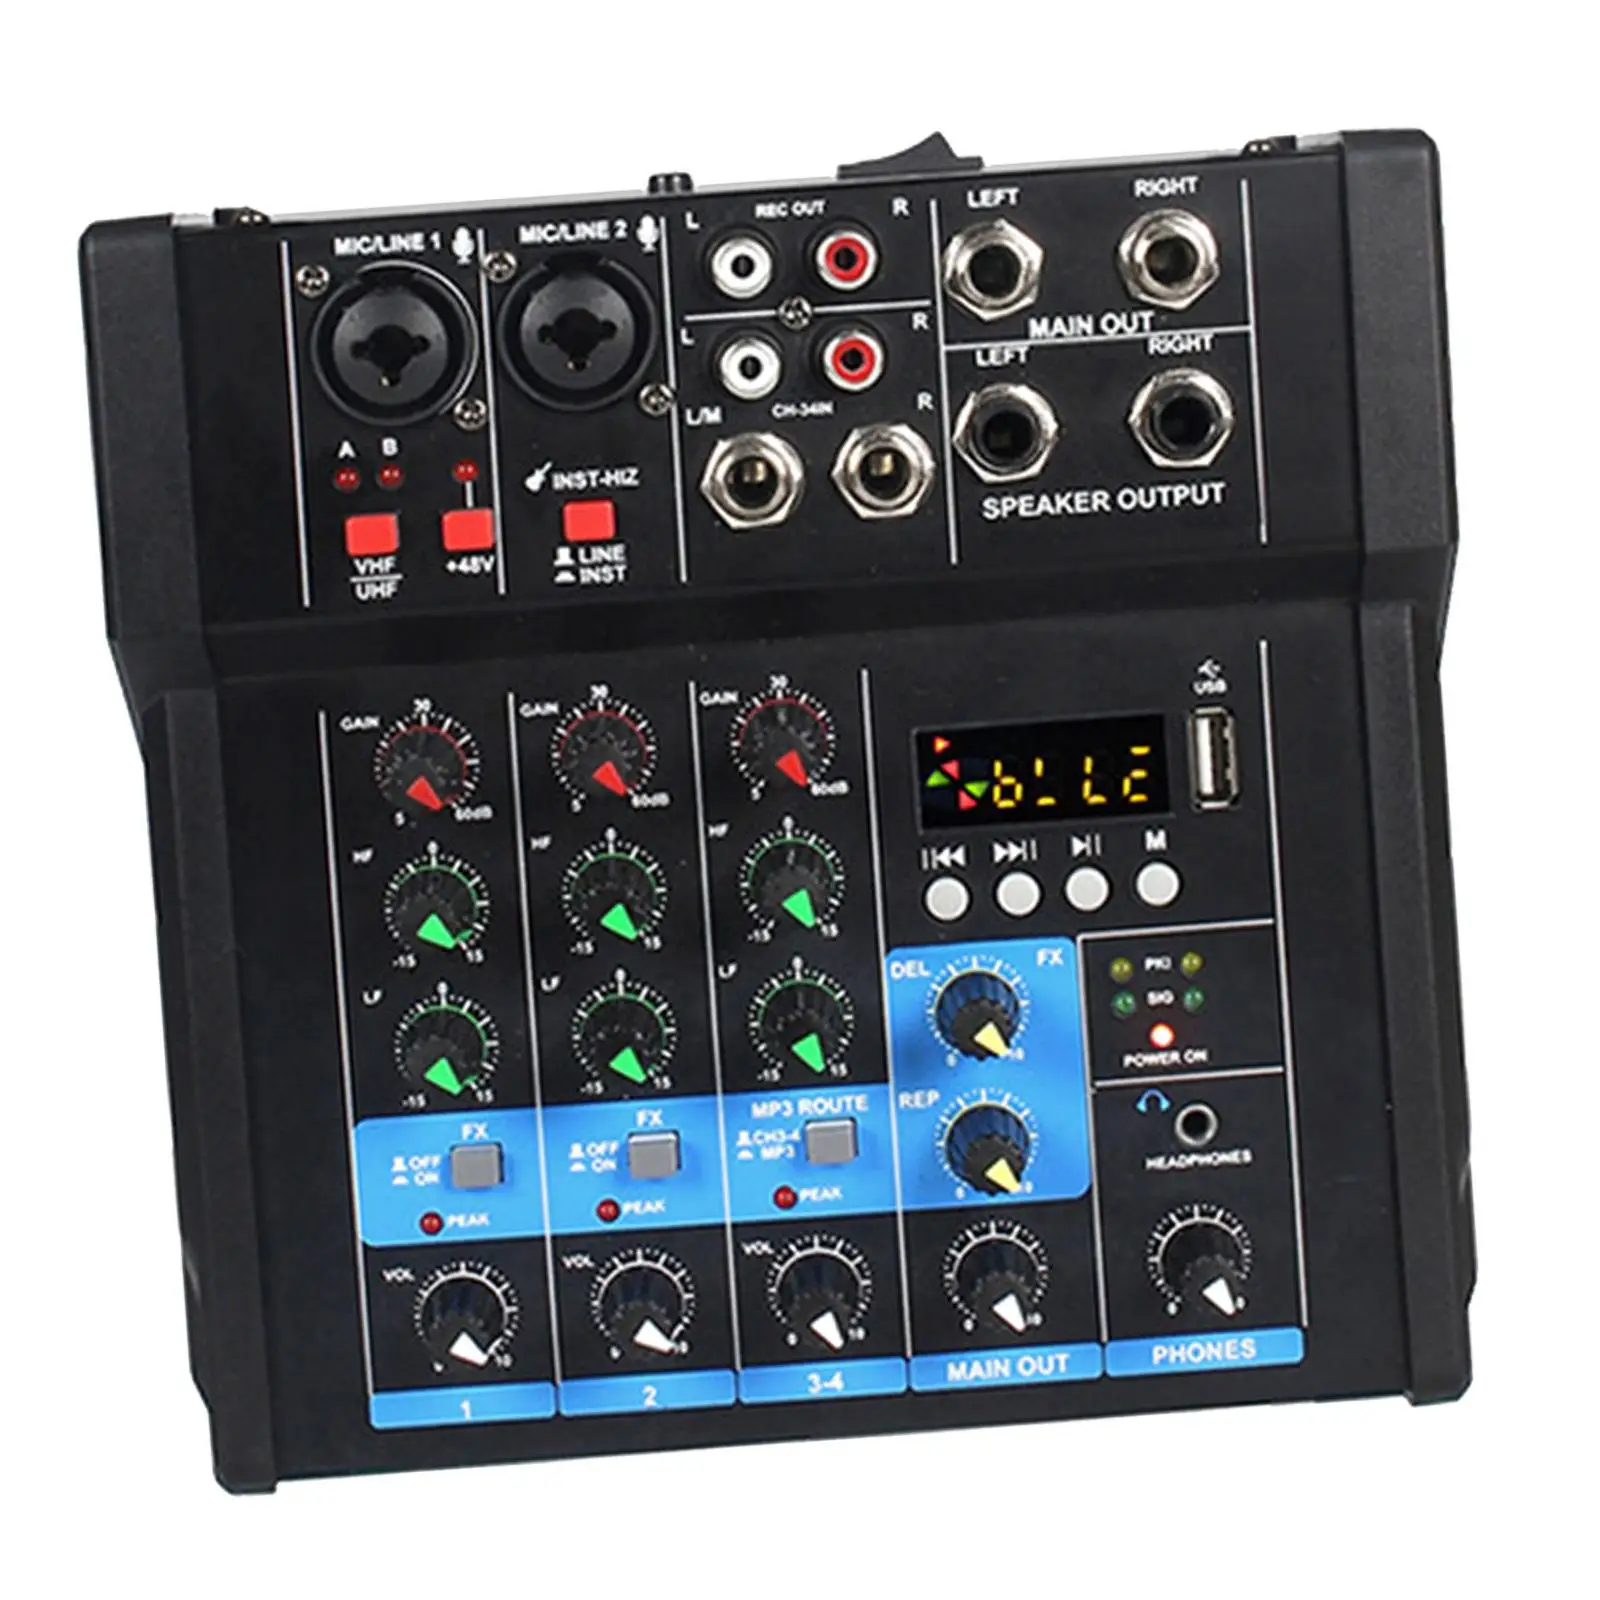 Audio Mixer 4 Channel Portable MP3 Bluetooth USB Interface Professional DJ Mixer for Studio Recording Party DJ Mixing Home